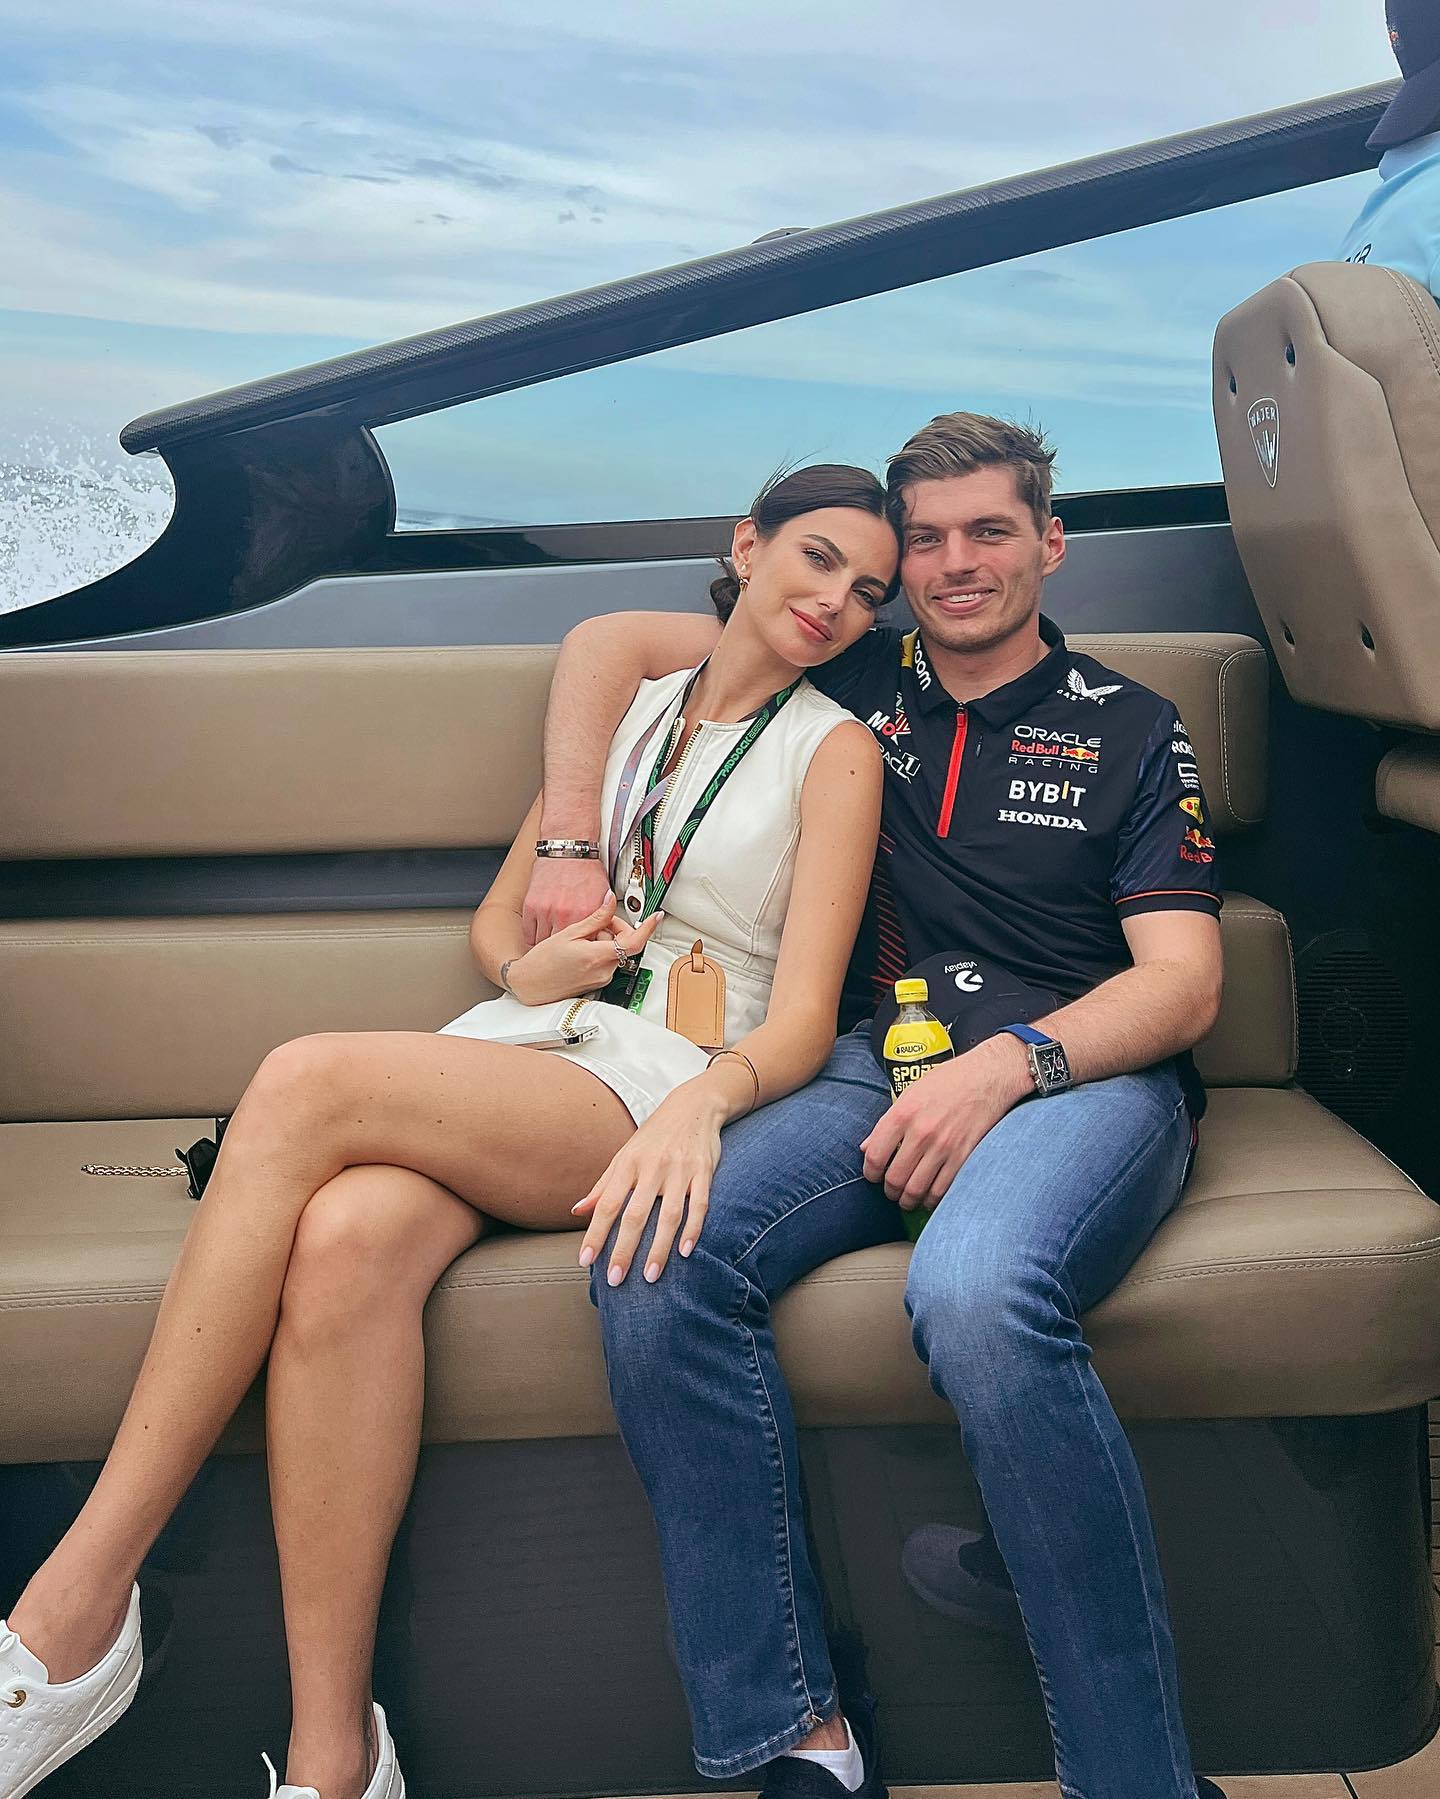 She is the girlfriend of Max Verstappen